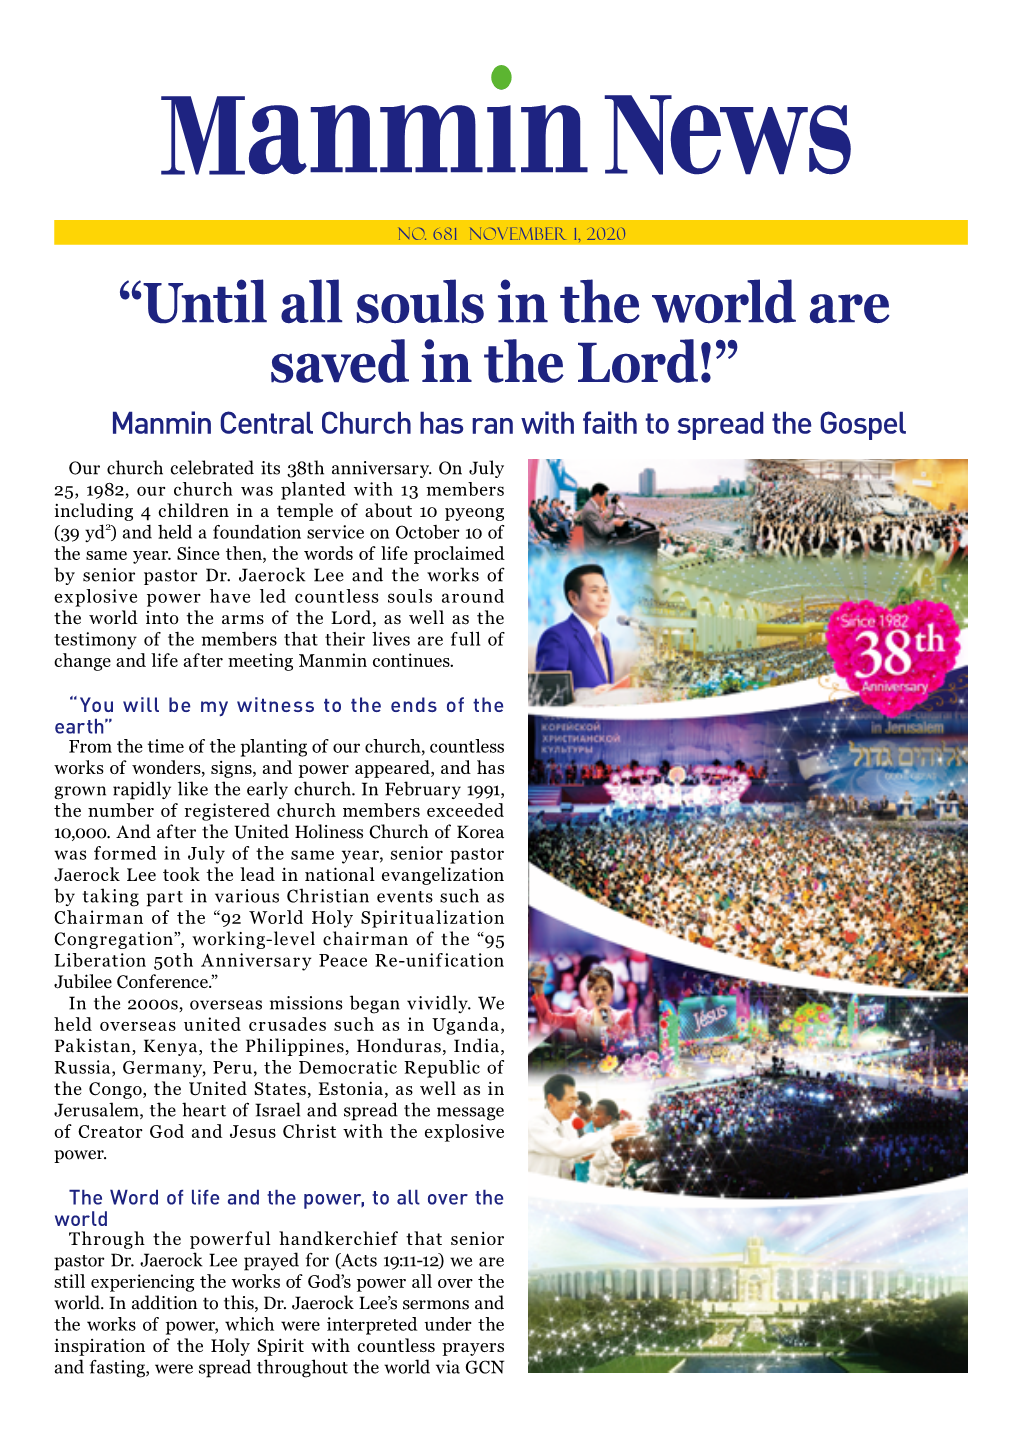 “Until All Souls in the World Are Saved in the Lord!” Manmin Central Church Has Ran with Faith to Spread the Gospel